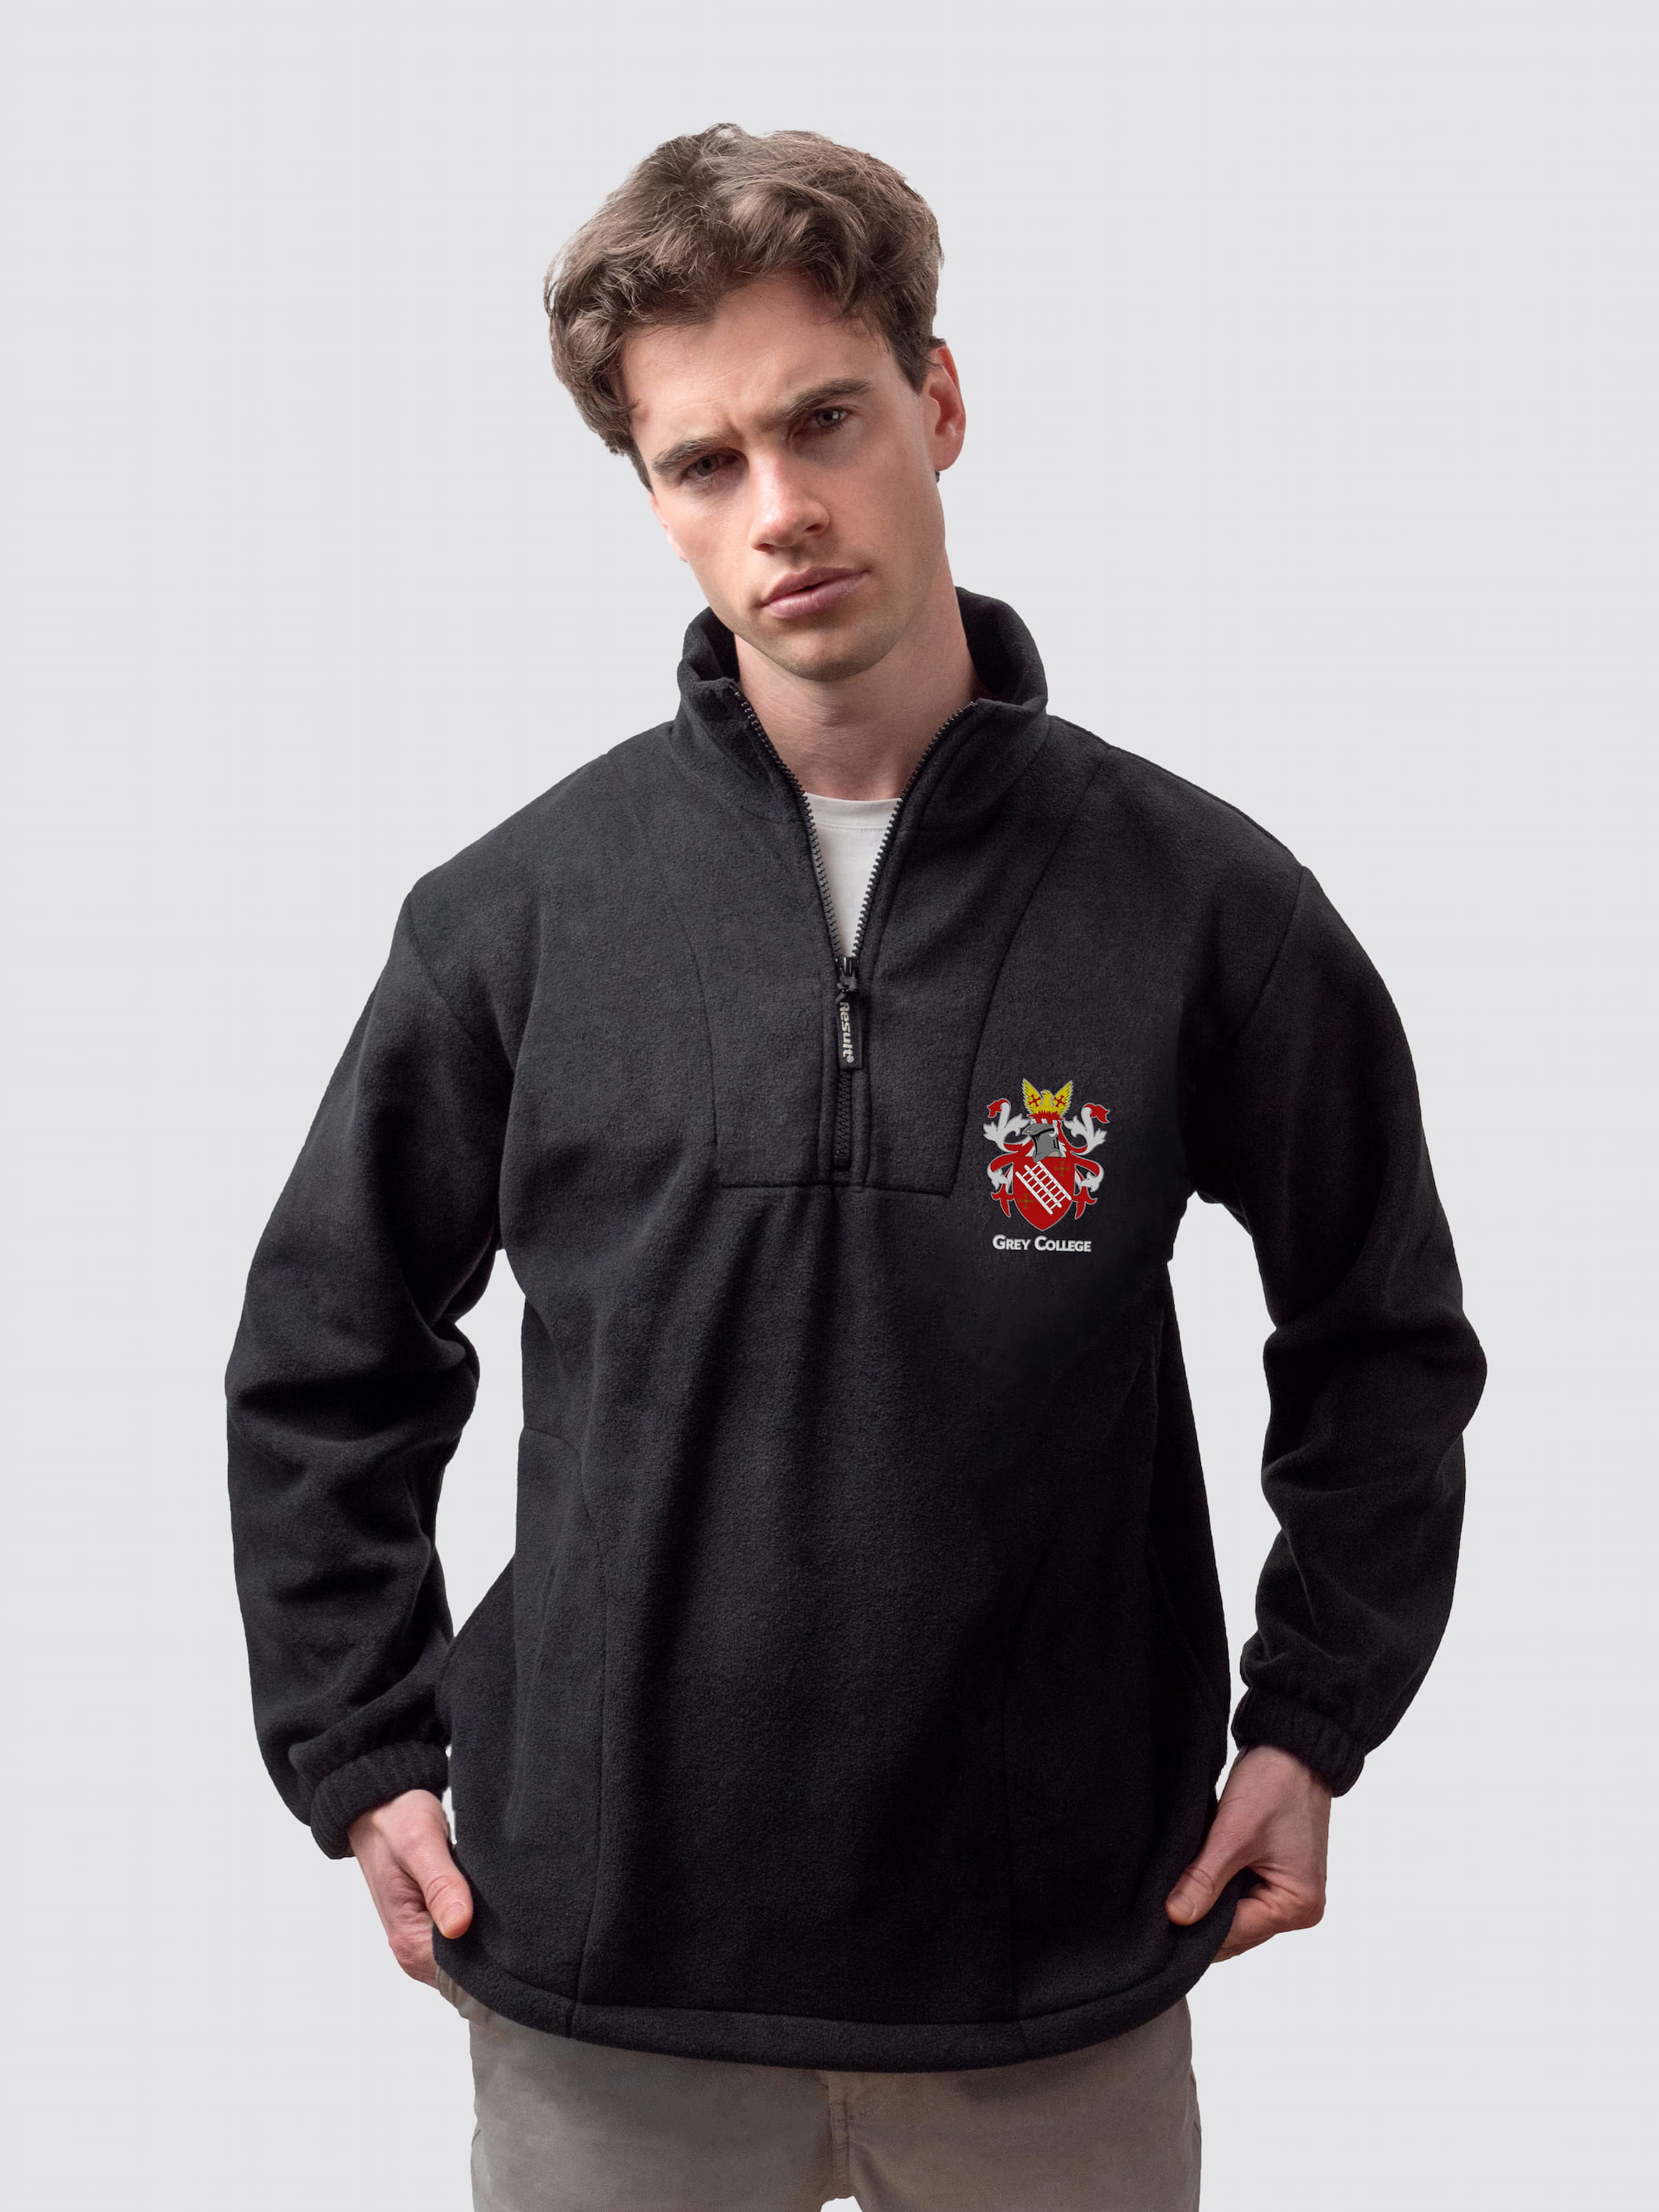 Durham University fleece, with custom embroidered initials and Grey College crest